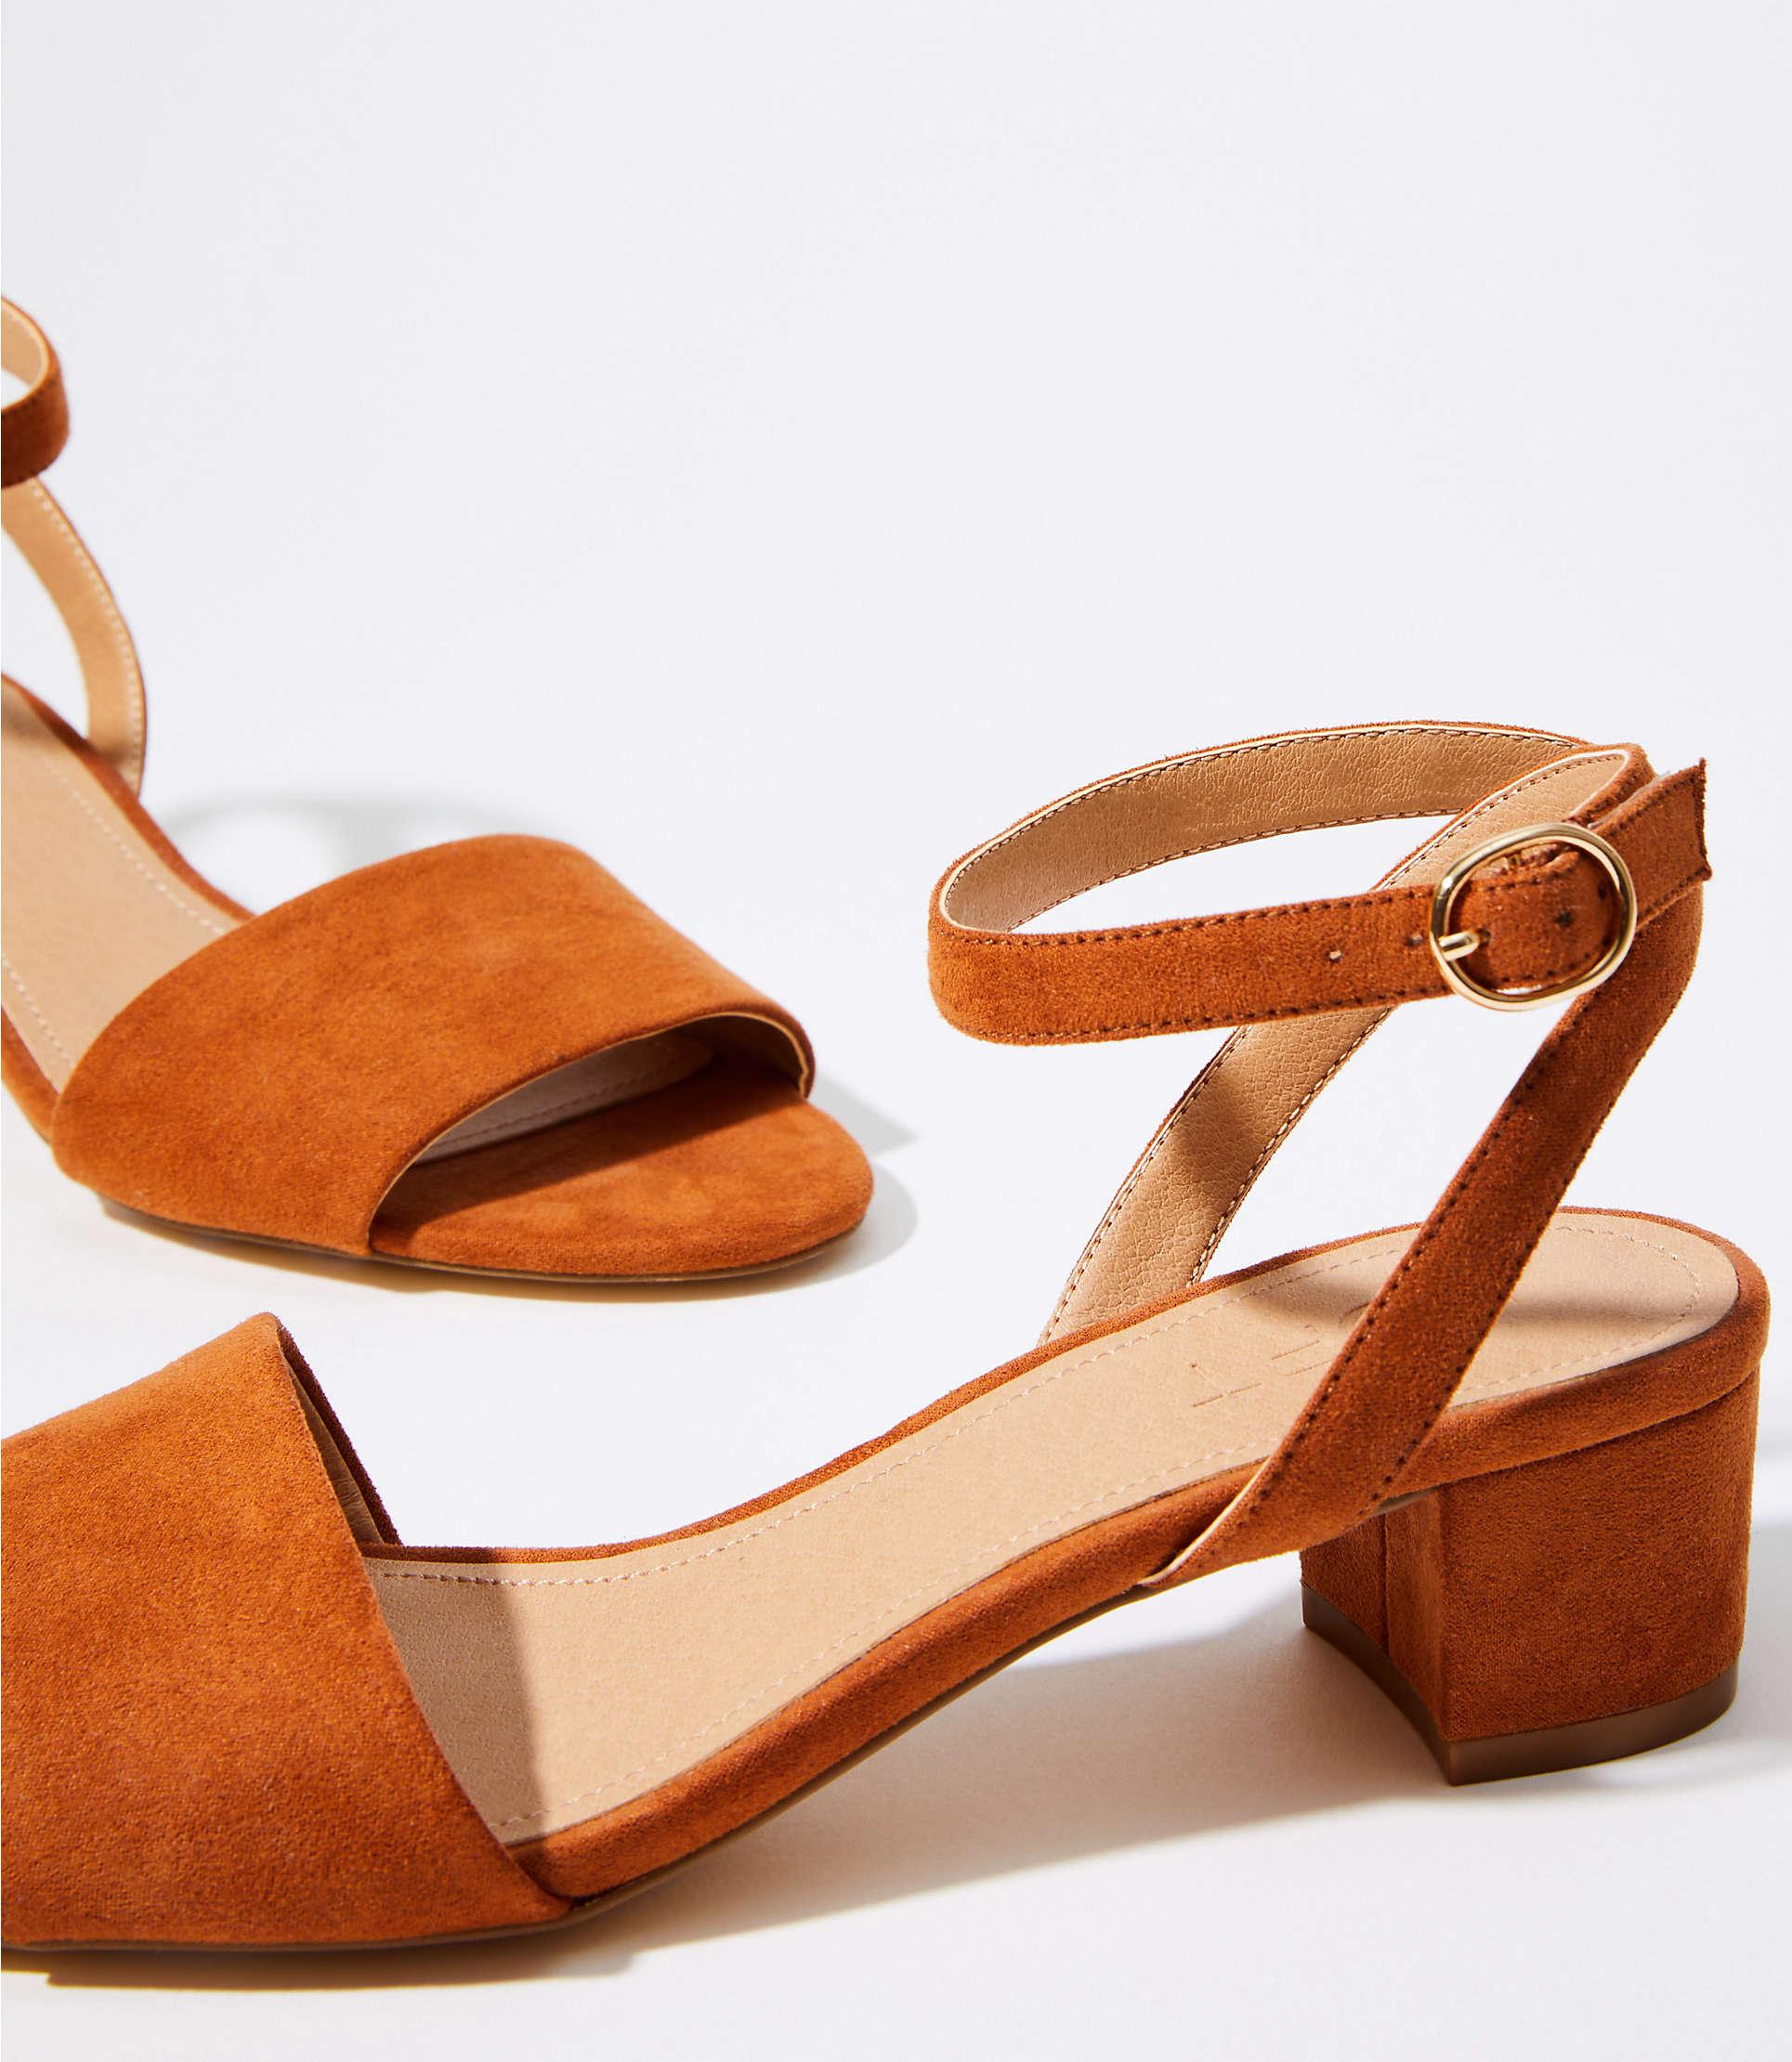 LOFT Ankle Strap Wedges in Brown - Lyst